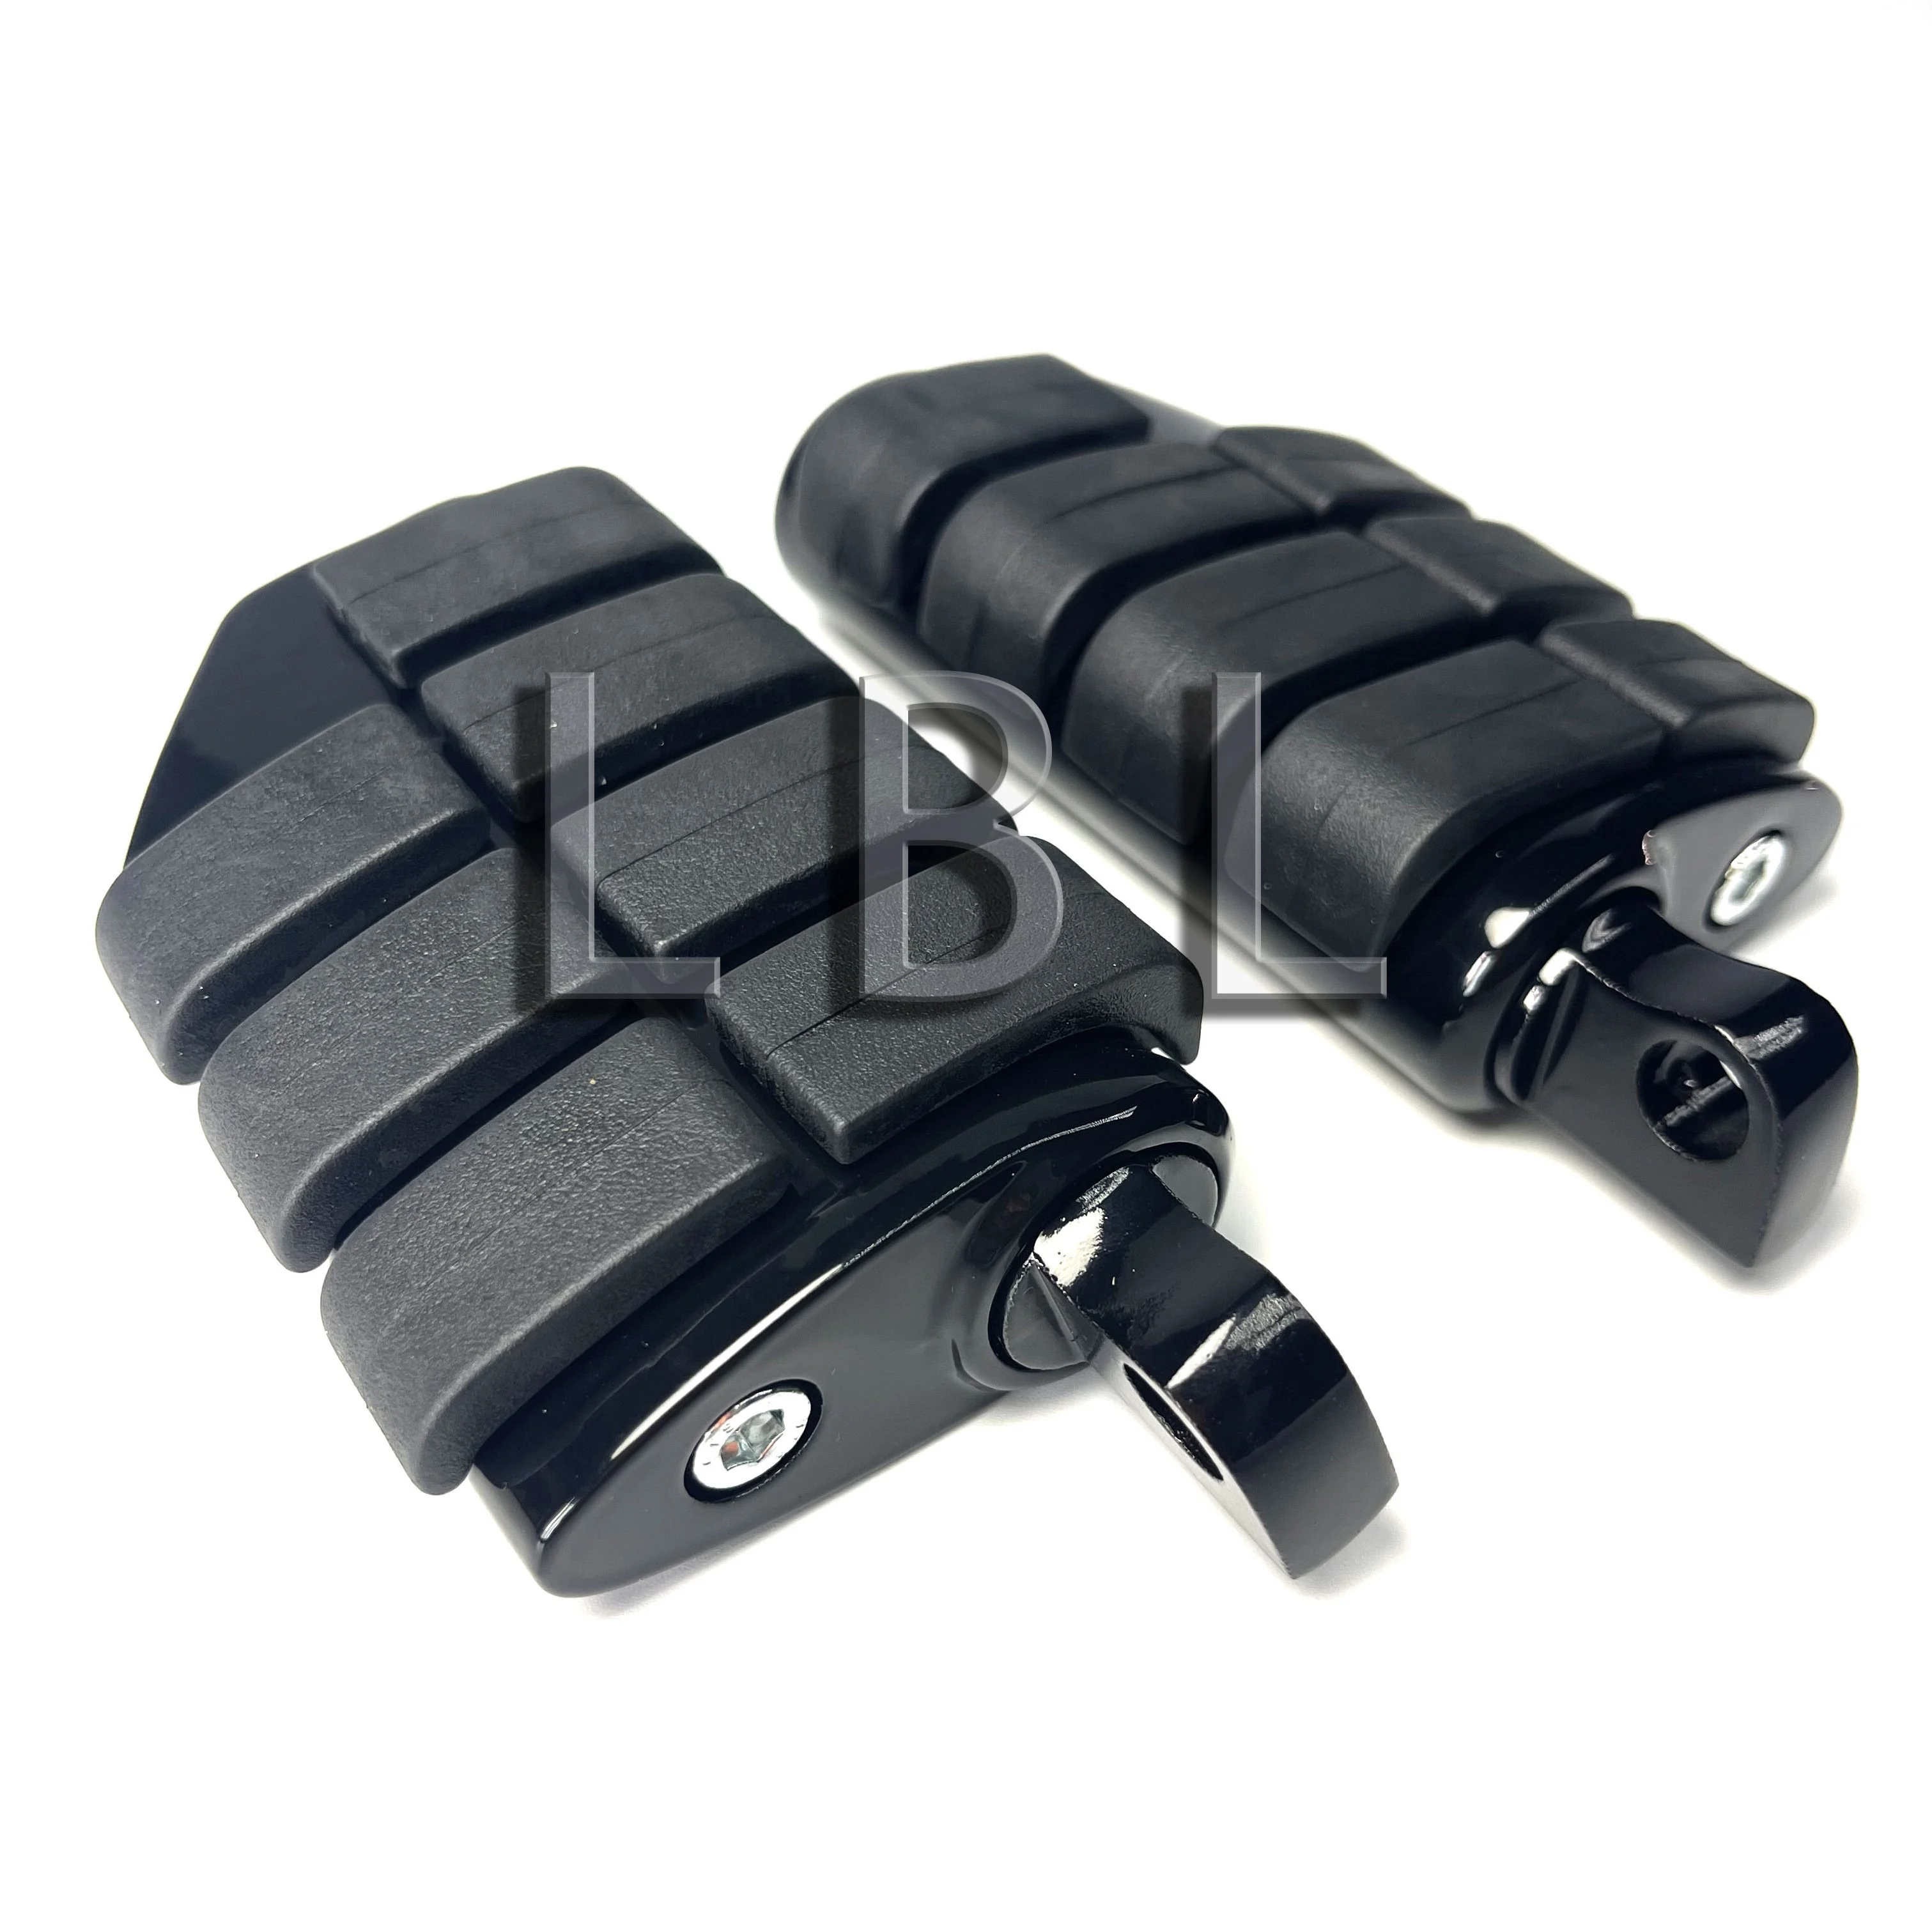 Pedals for motorcycle fit for Harley with high quality